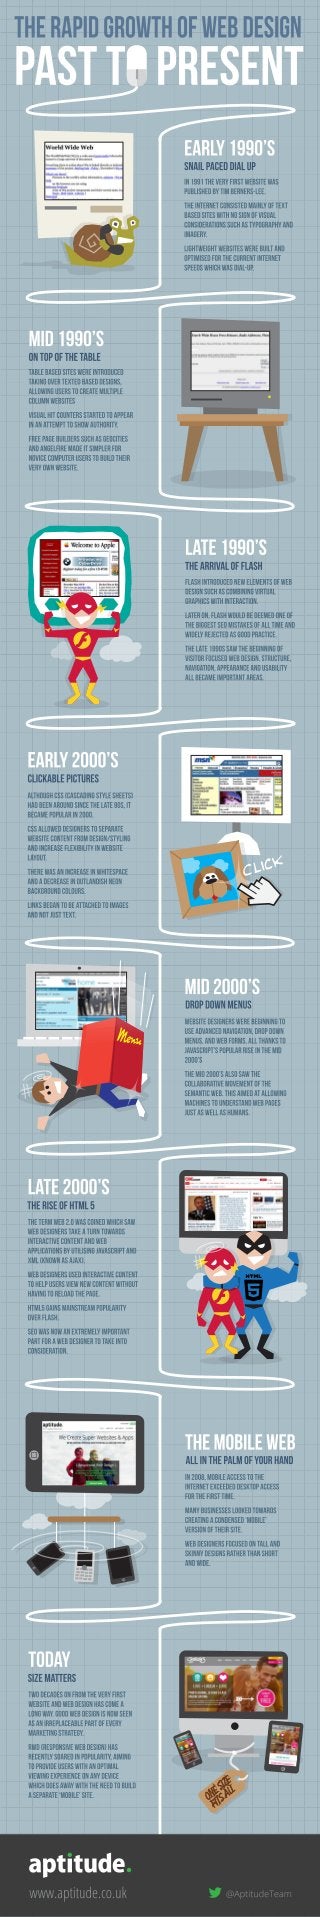 The Rapid Growth of Web Design: Past to Present